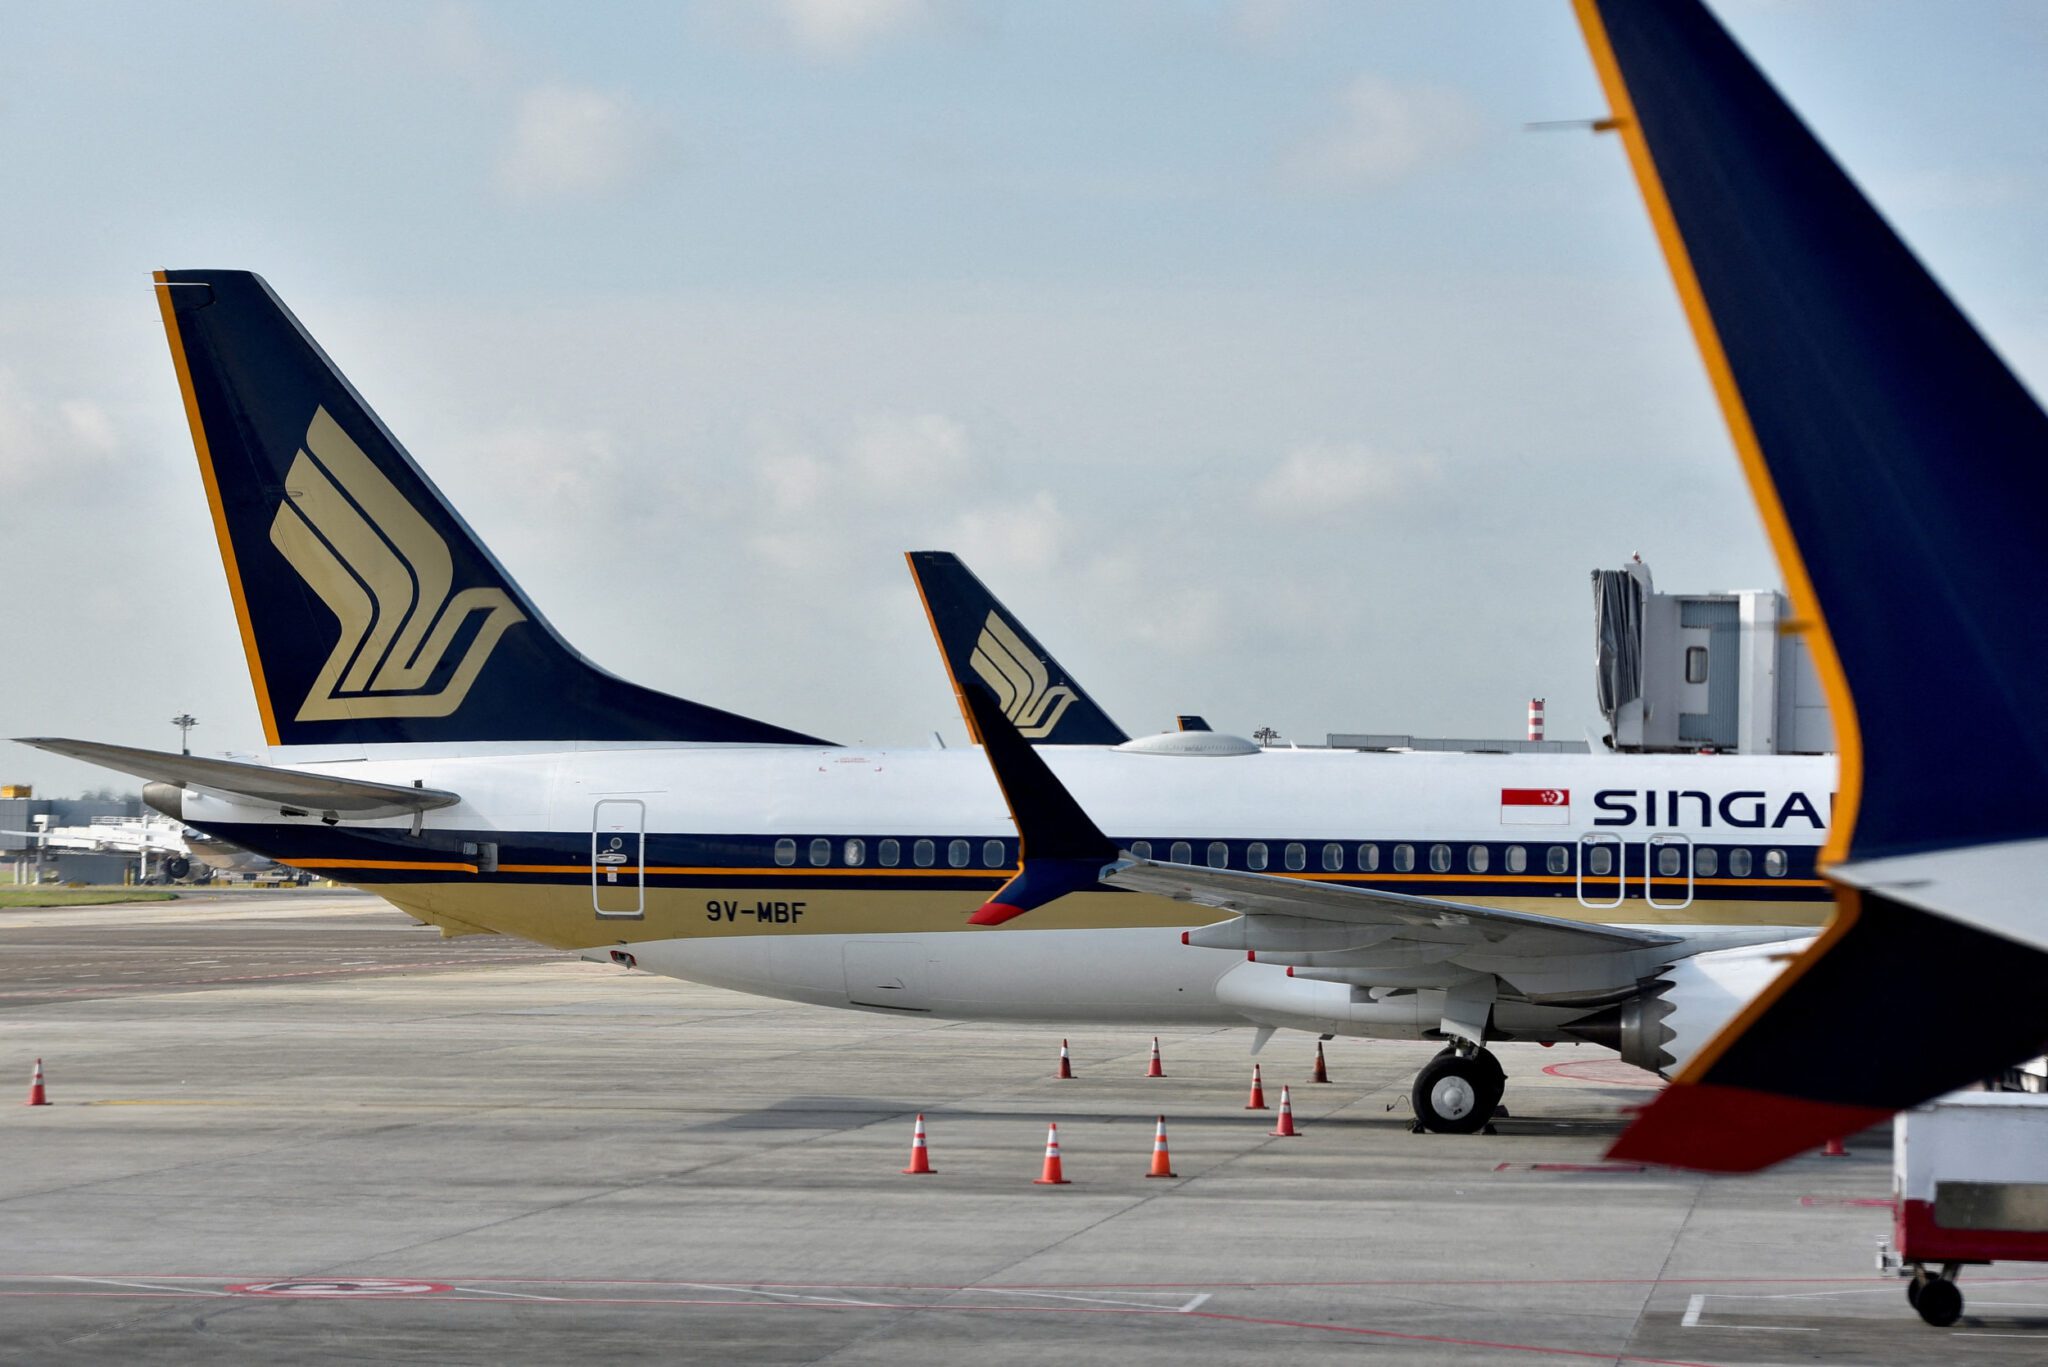 Singapore Airlines, like other carriers in the region, faces hurdles in its quest to make a full recovery from the pandemic